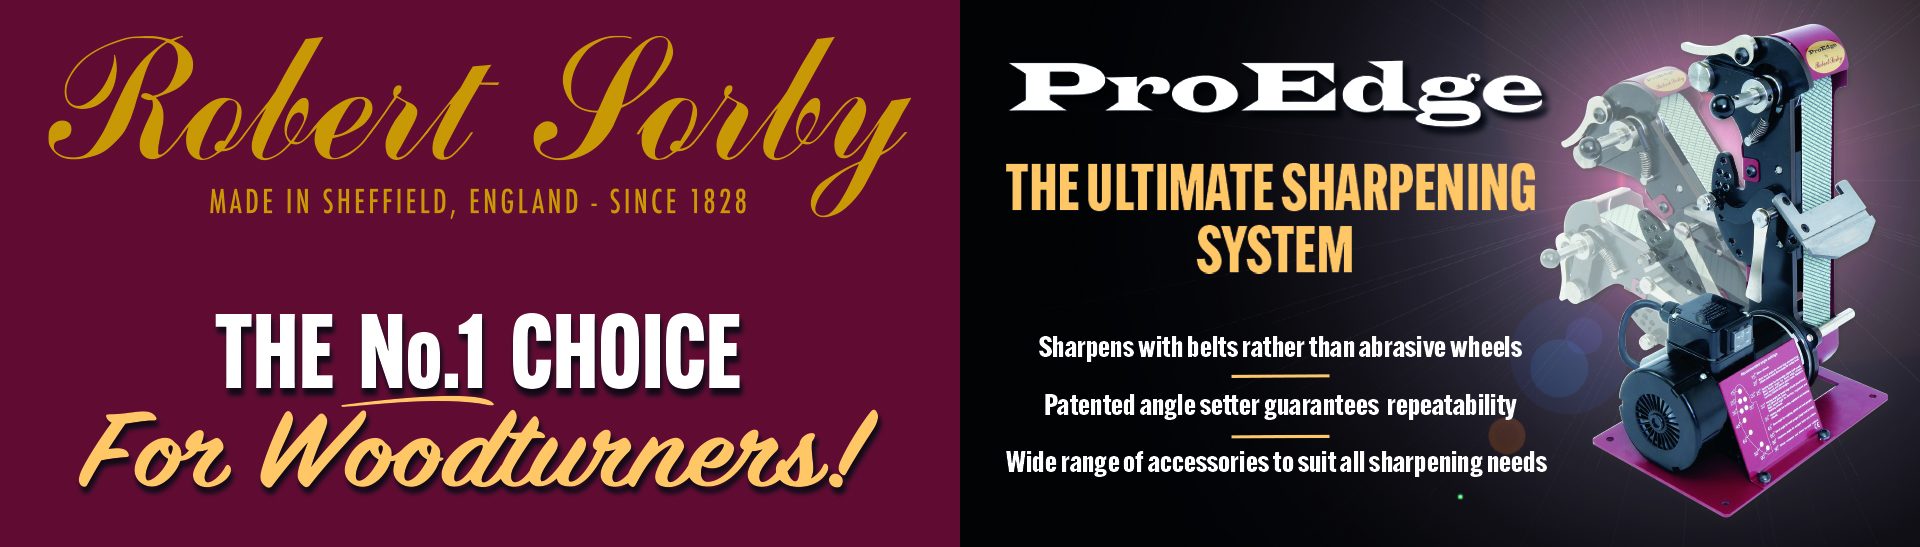 Robert Sorby ProEdge Plus Deluxe System!